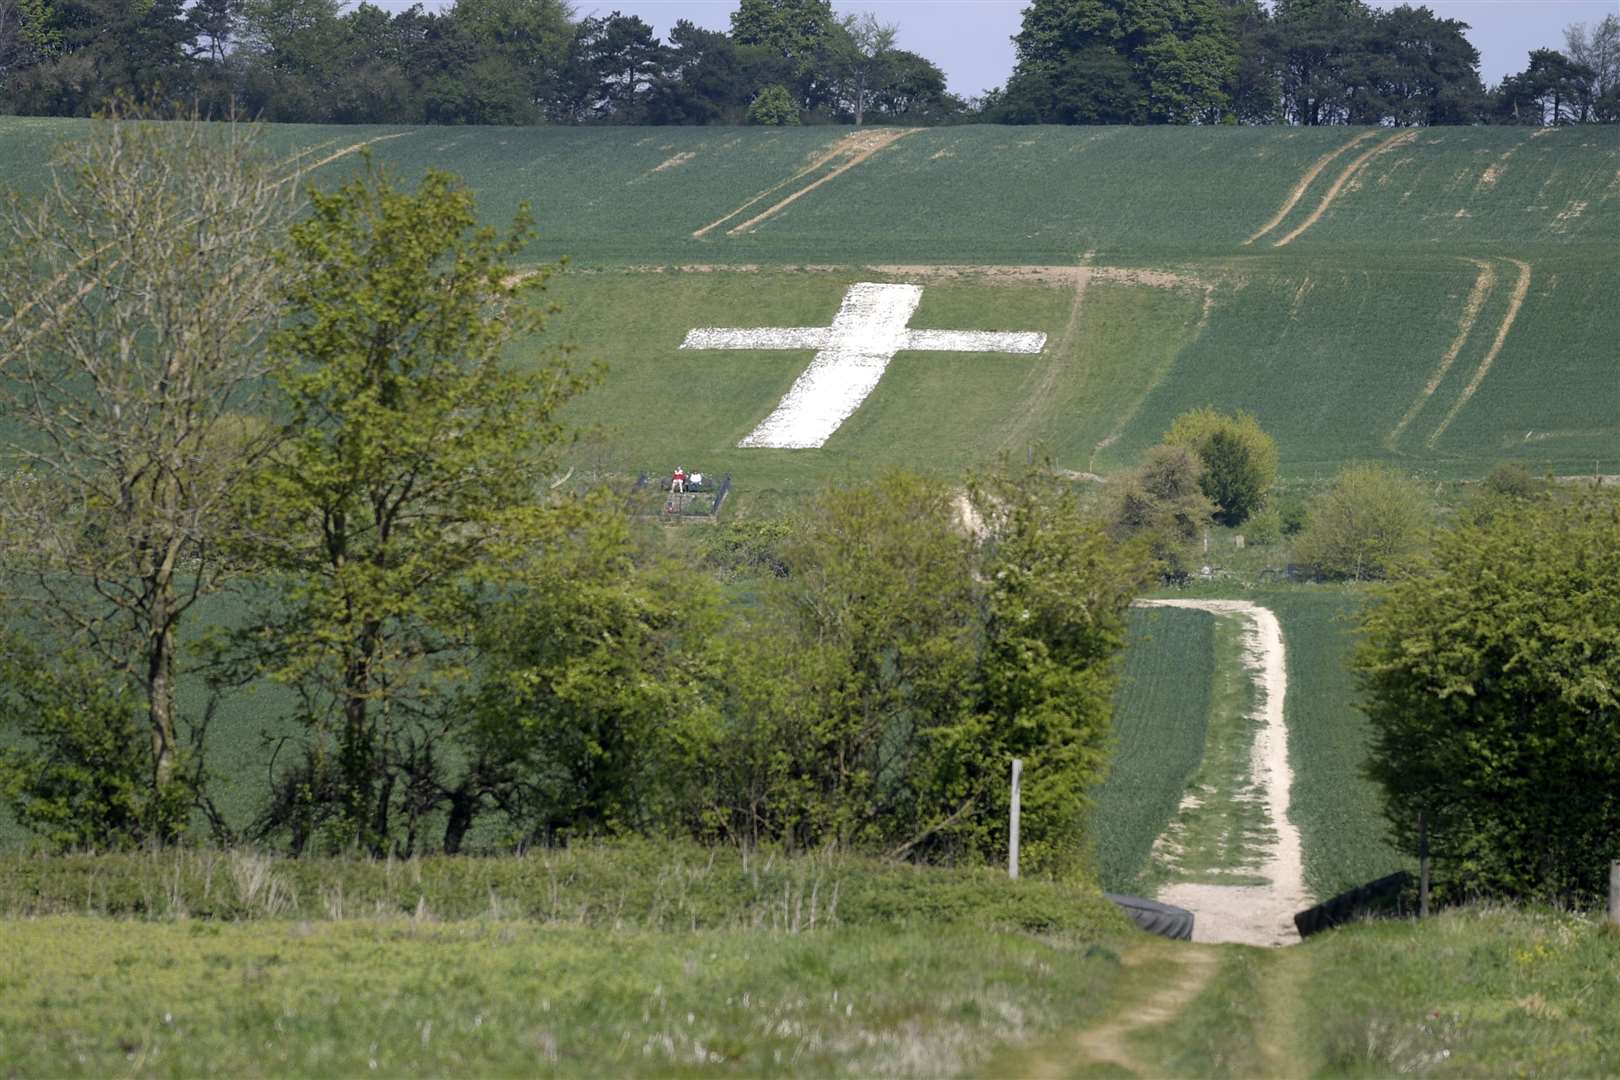 The chalk cross is high on a hill